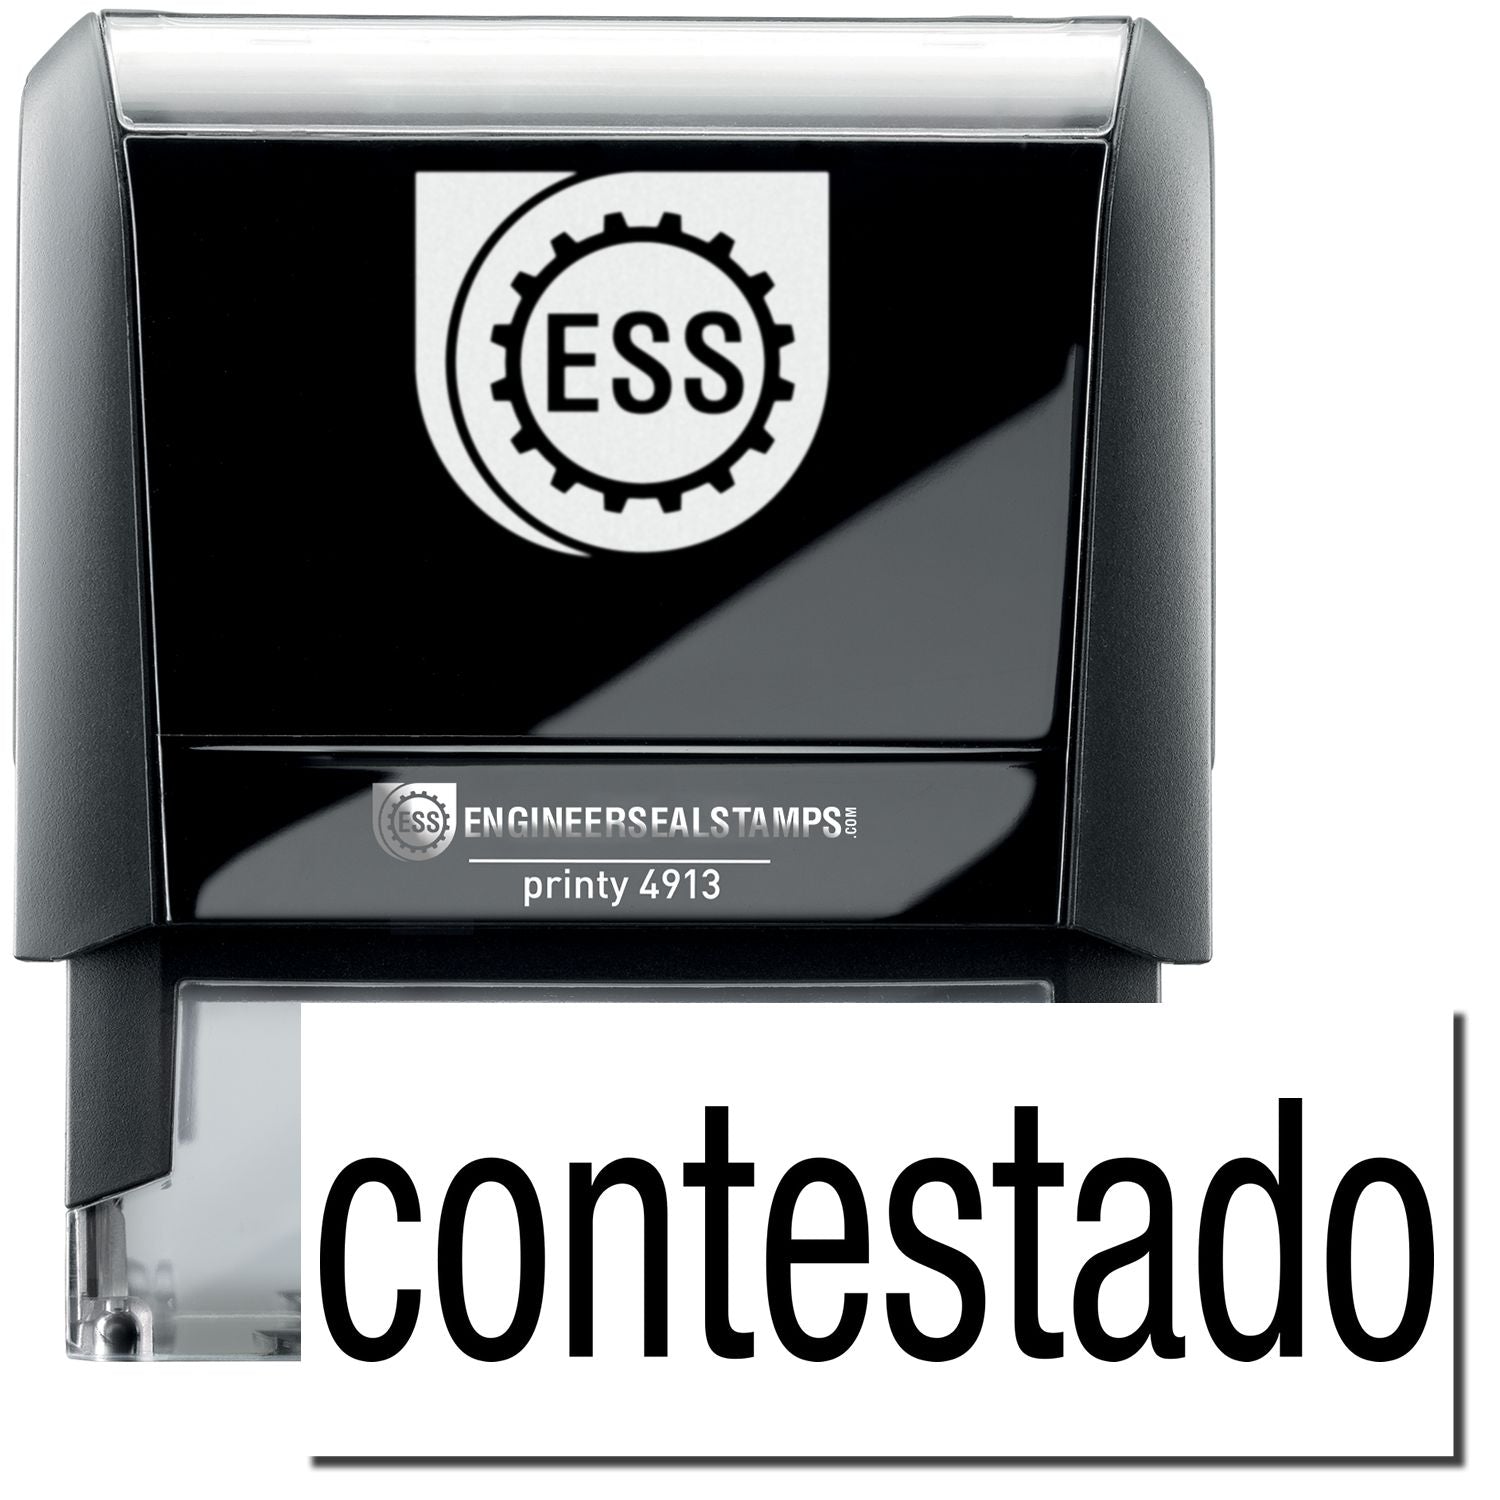 A self-inking stamp with a stamped image showing how the text "contestado" in a large font is displayed by it after stamping.